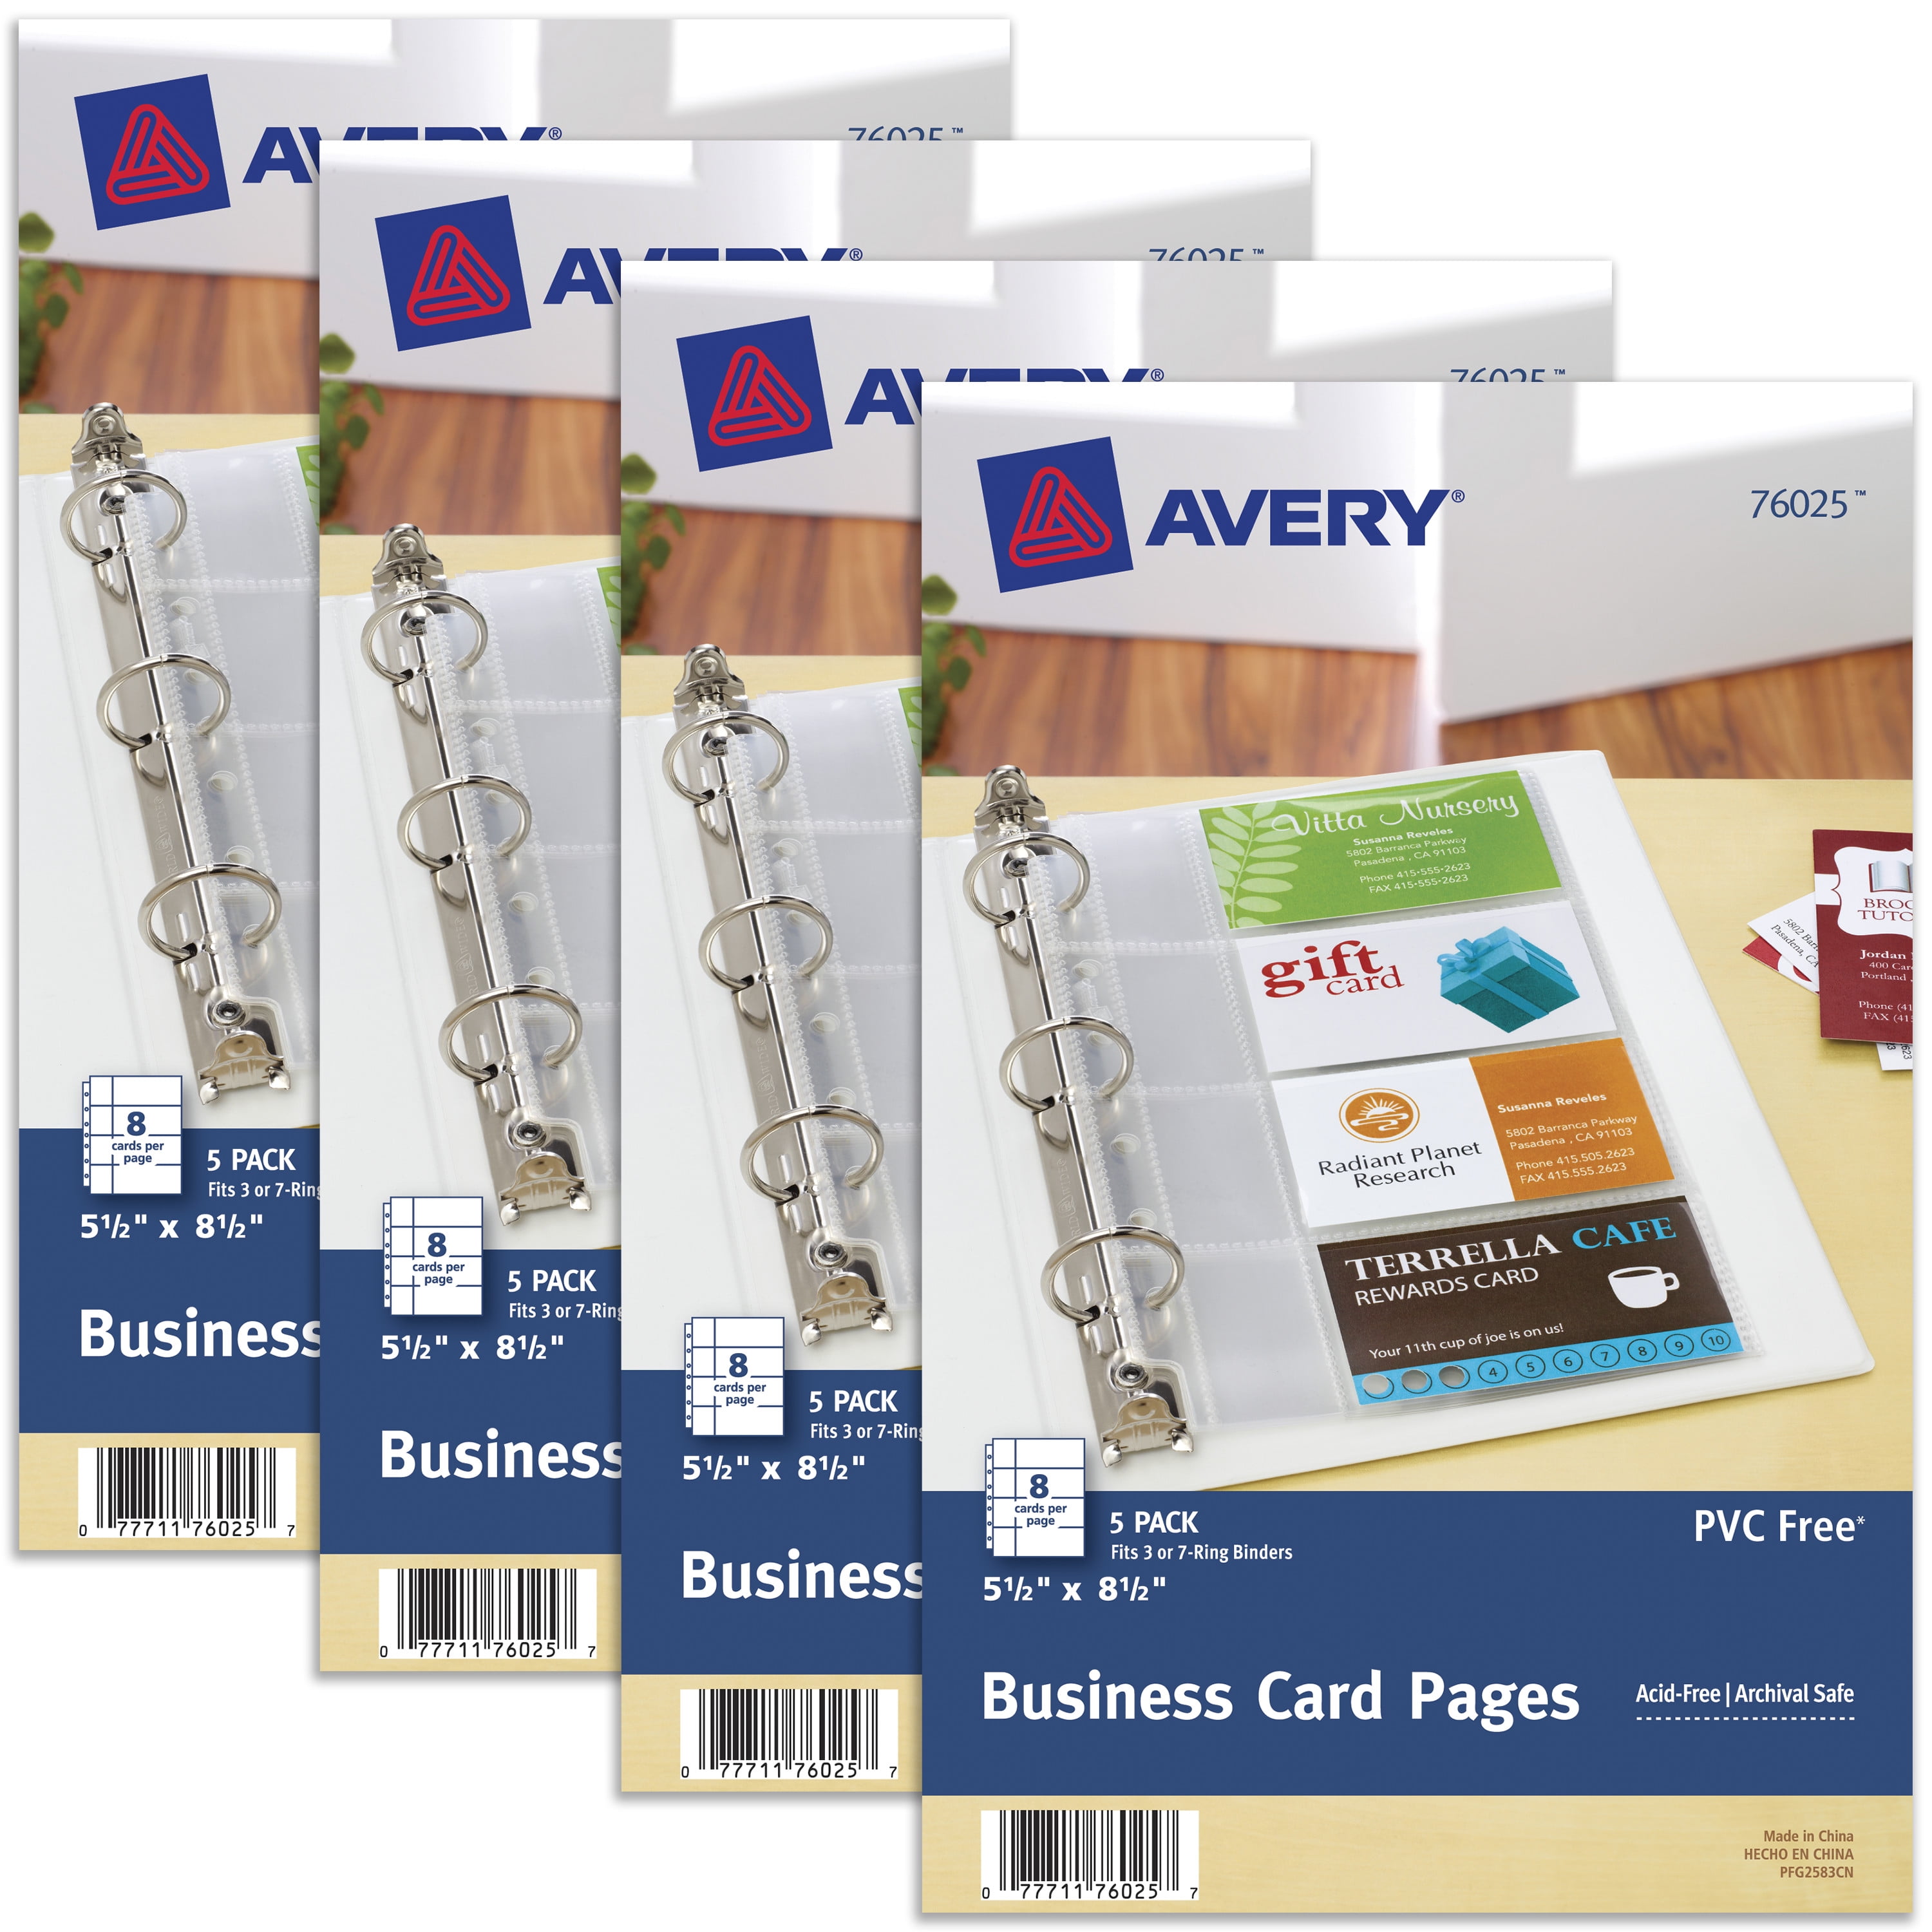 Business Card Sleeves for 3 Ring Binders, Plastic Card Holder Sheets, 10 Pack - 20 Cards per Sheet